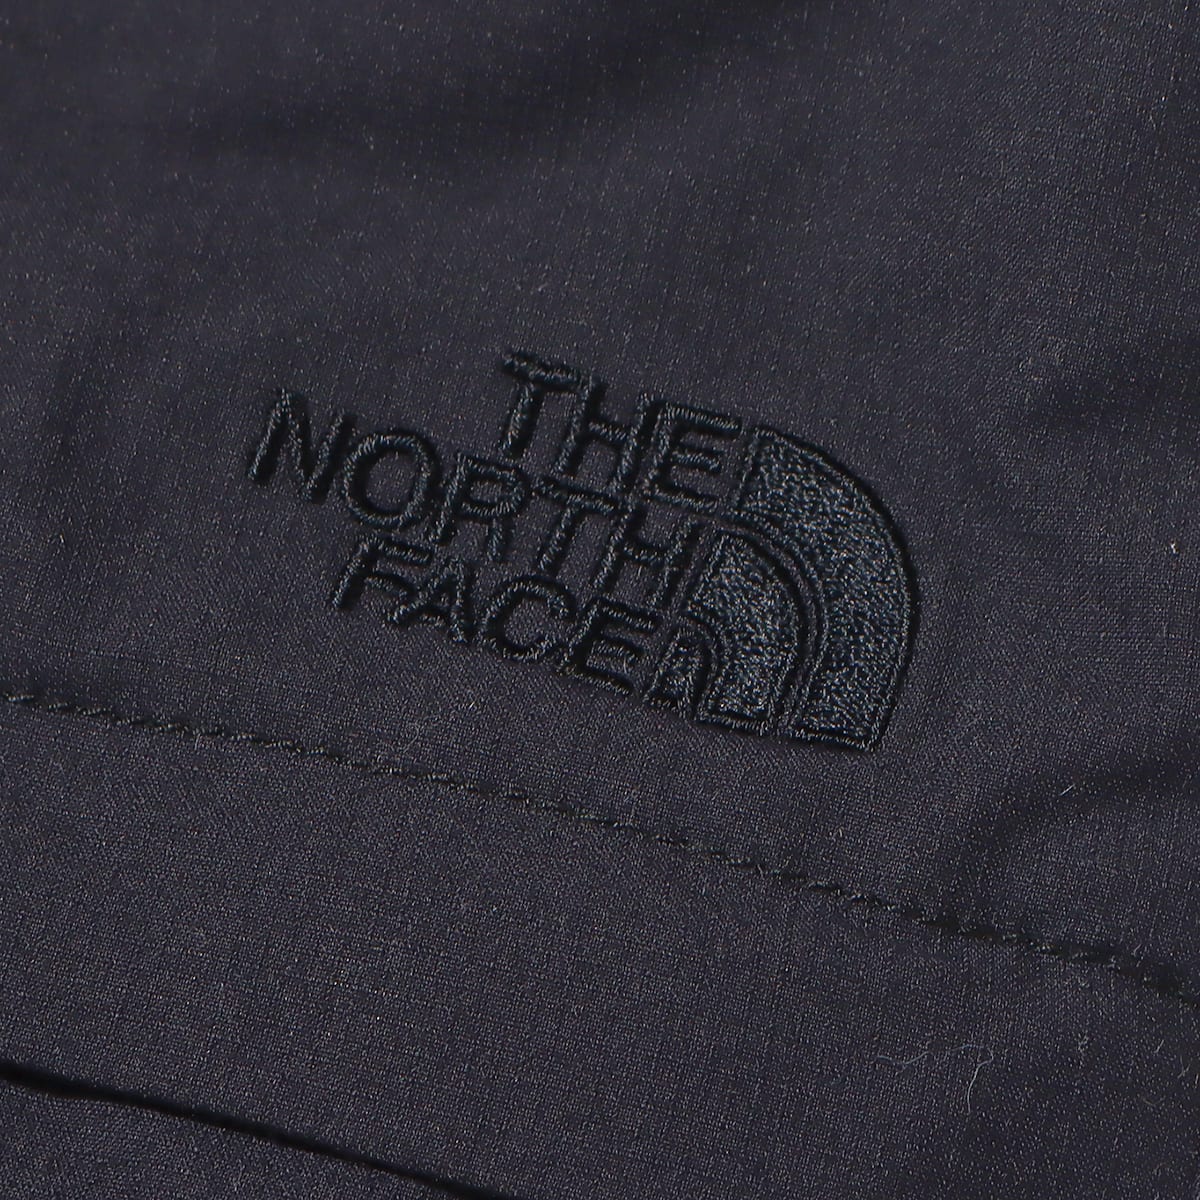 THE NORTH FACE FIREFLY INSULATED PANT ブラック 22FW-I